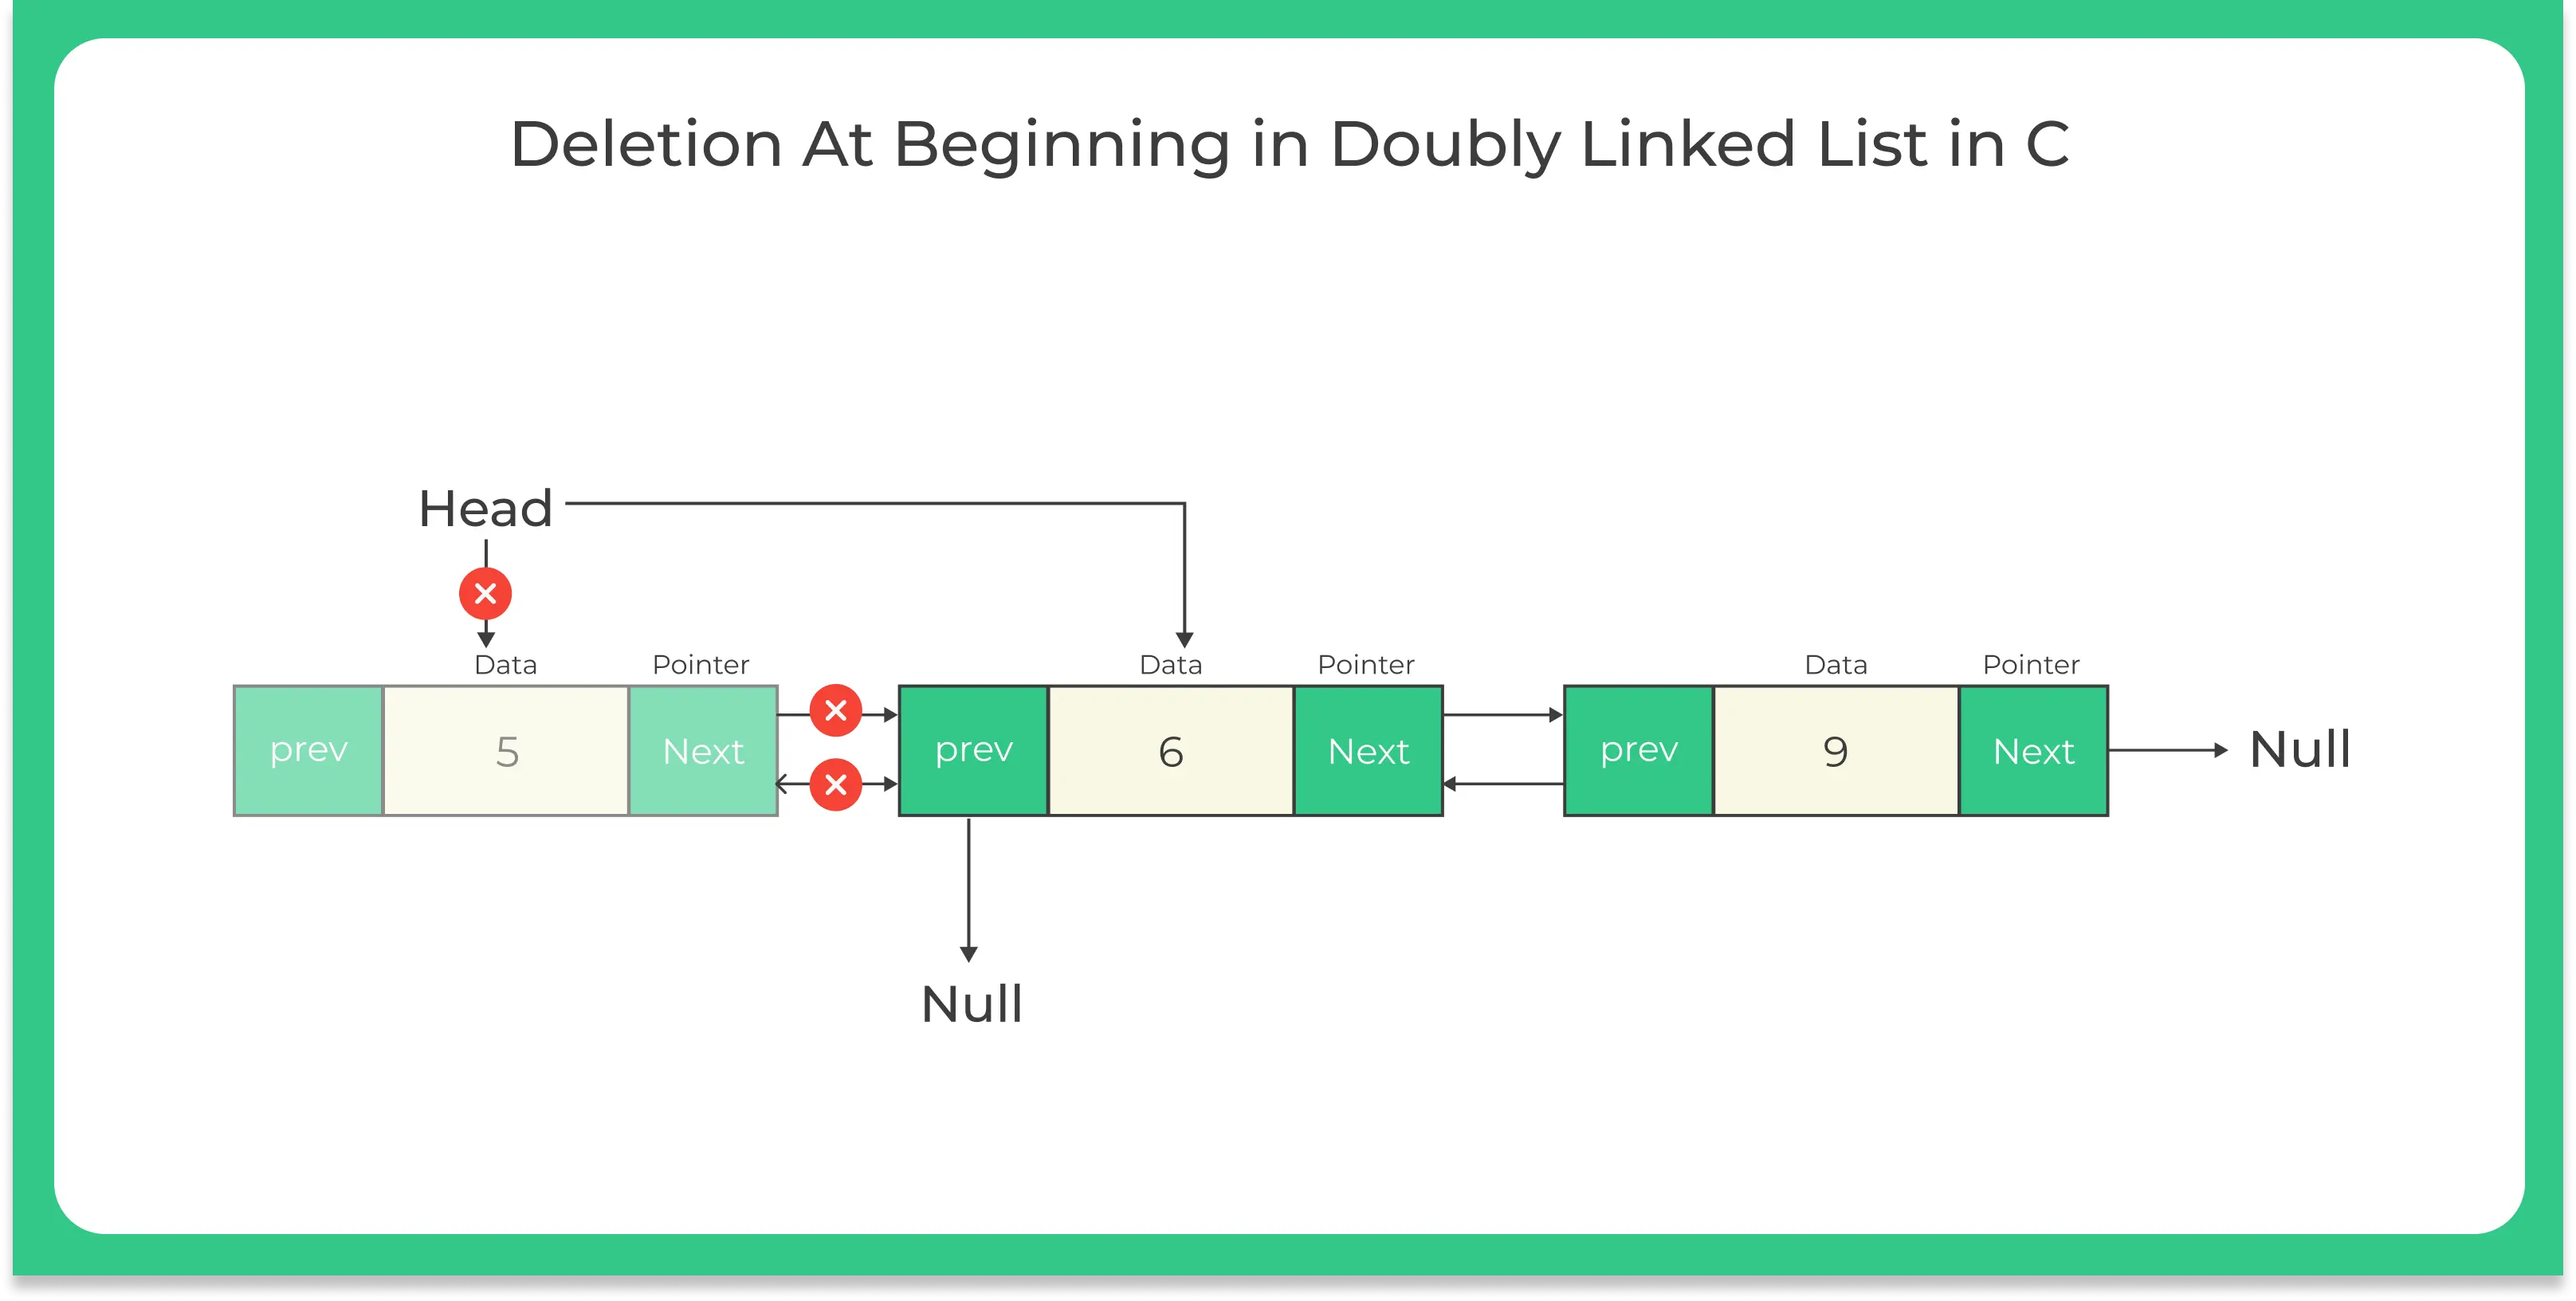 Deletion in doubly linked list in C++